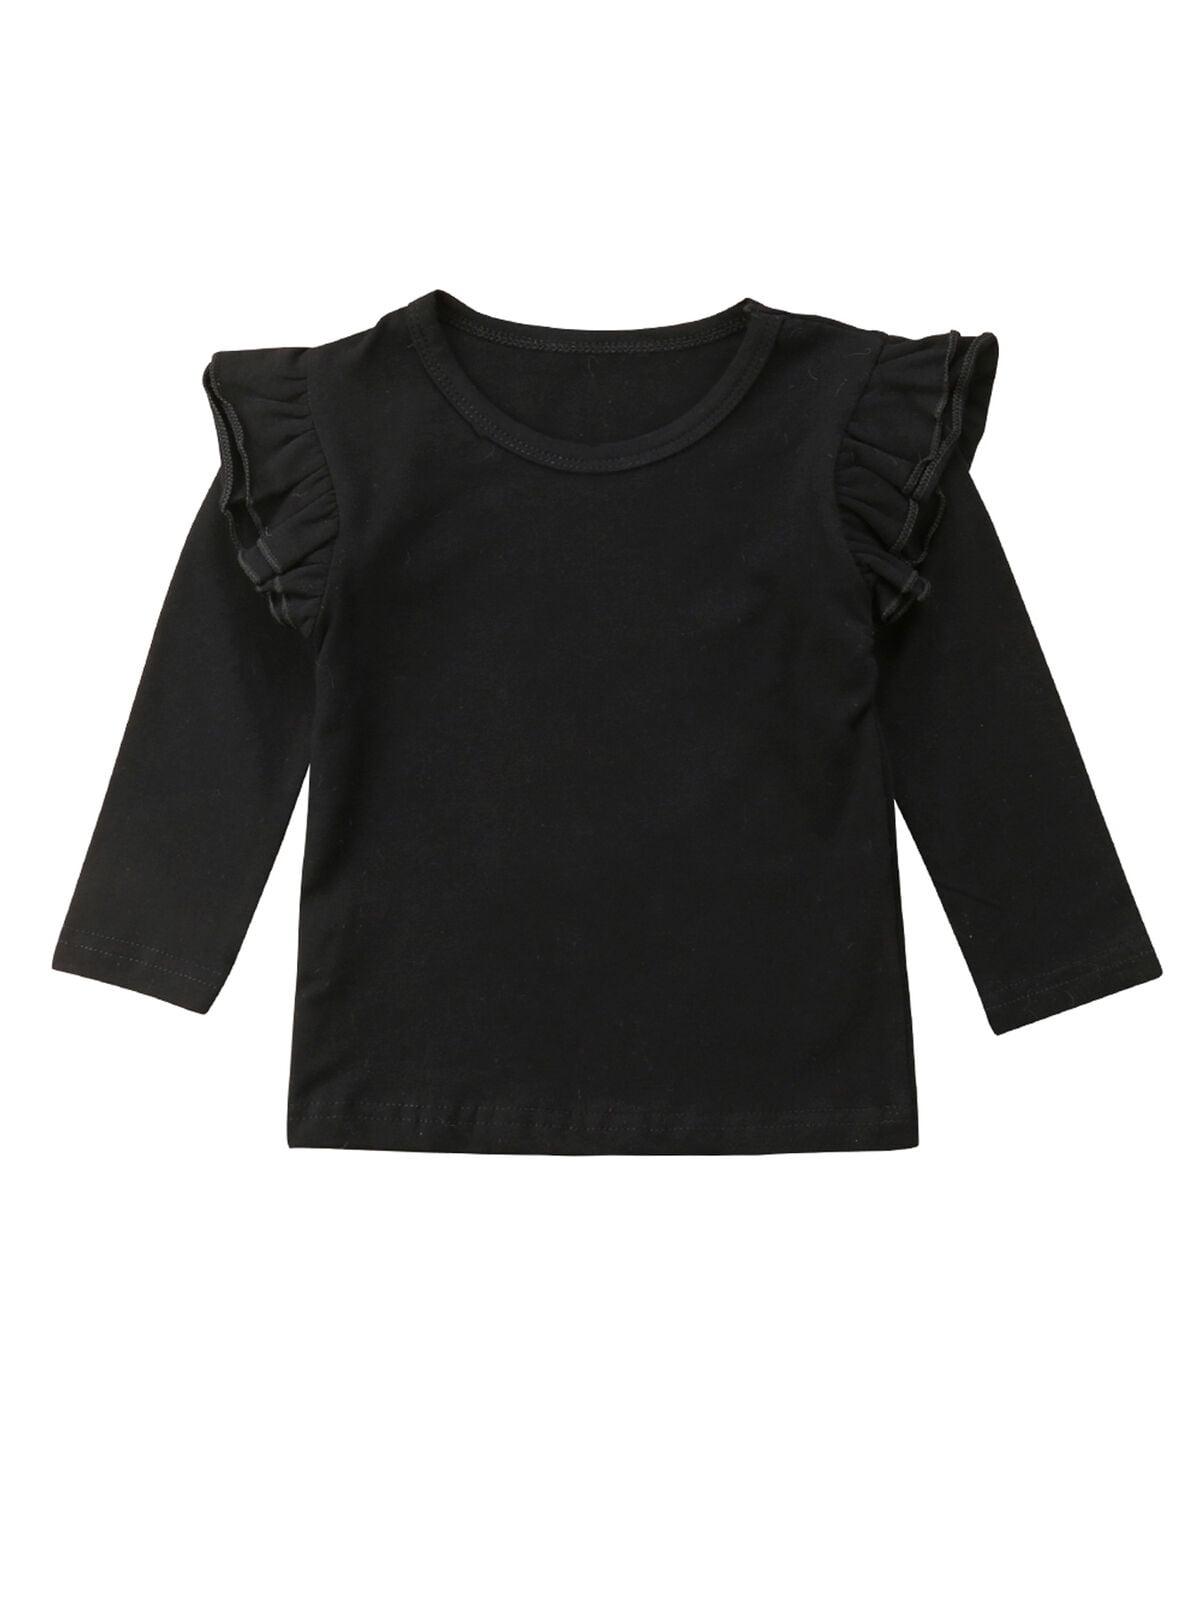 Toddler Kids Baby Girl Long Sleeve Knit Blouse Ruffled Shoulder T-Shirt Top with Adjustable Straps 